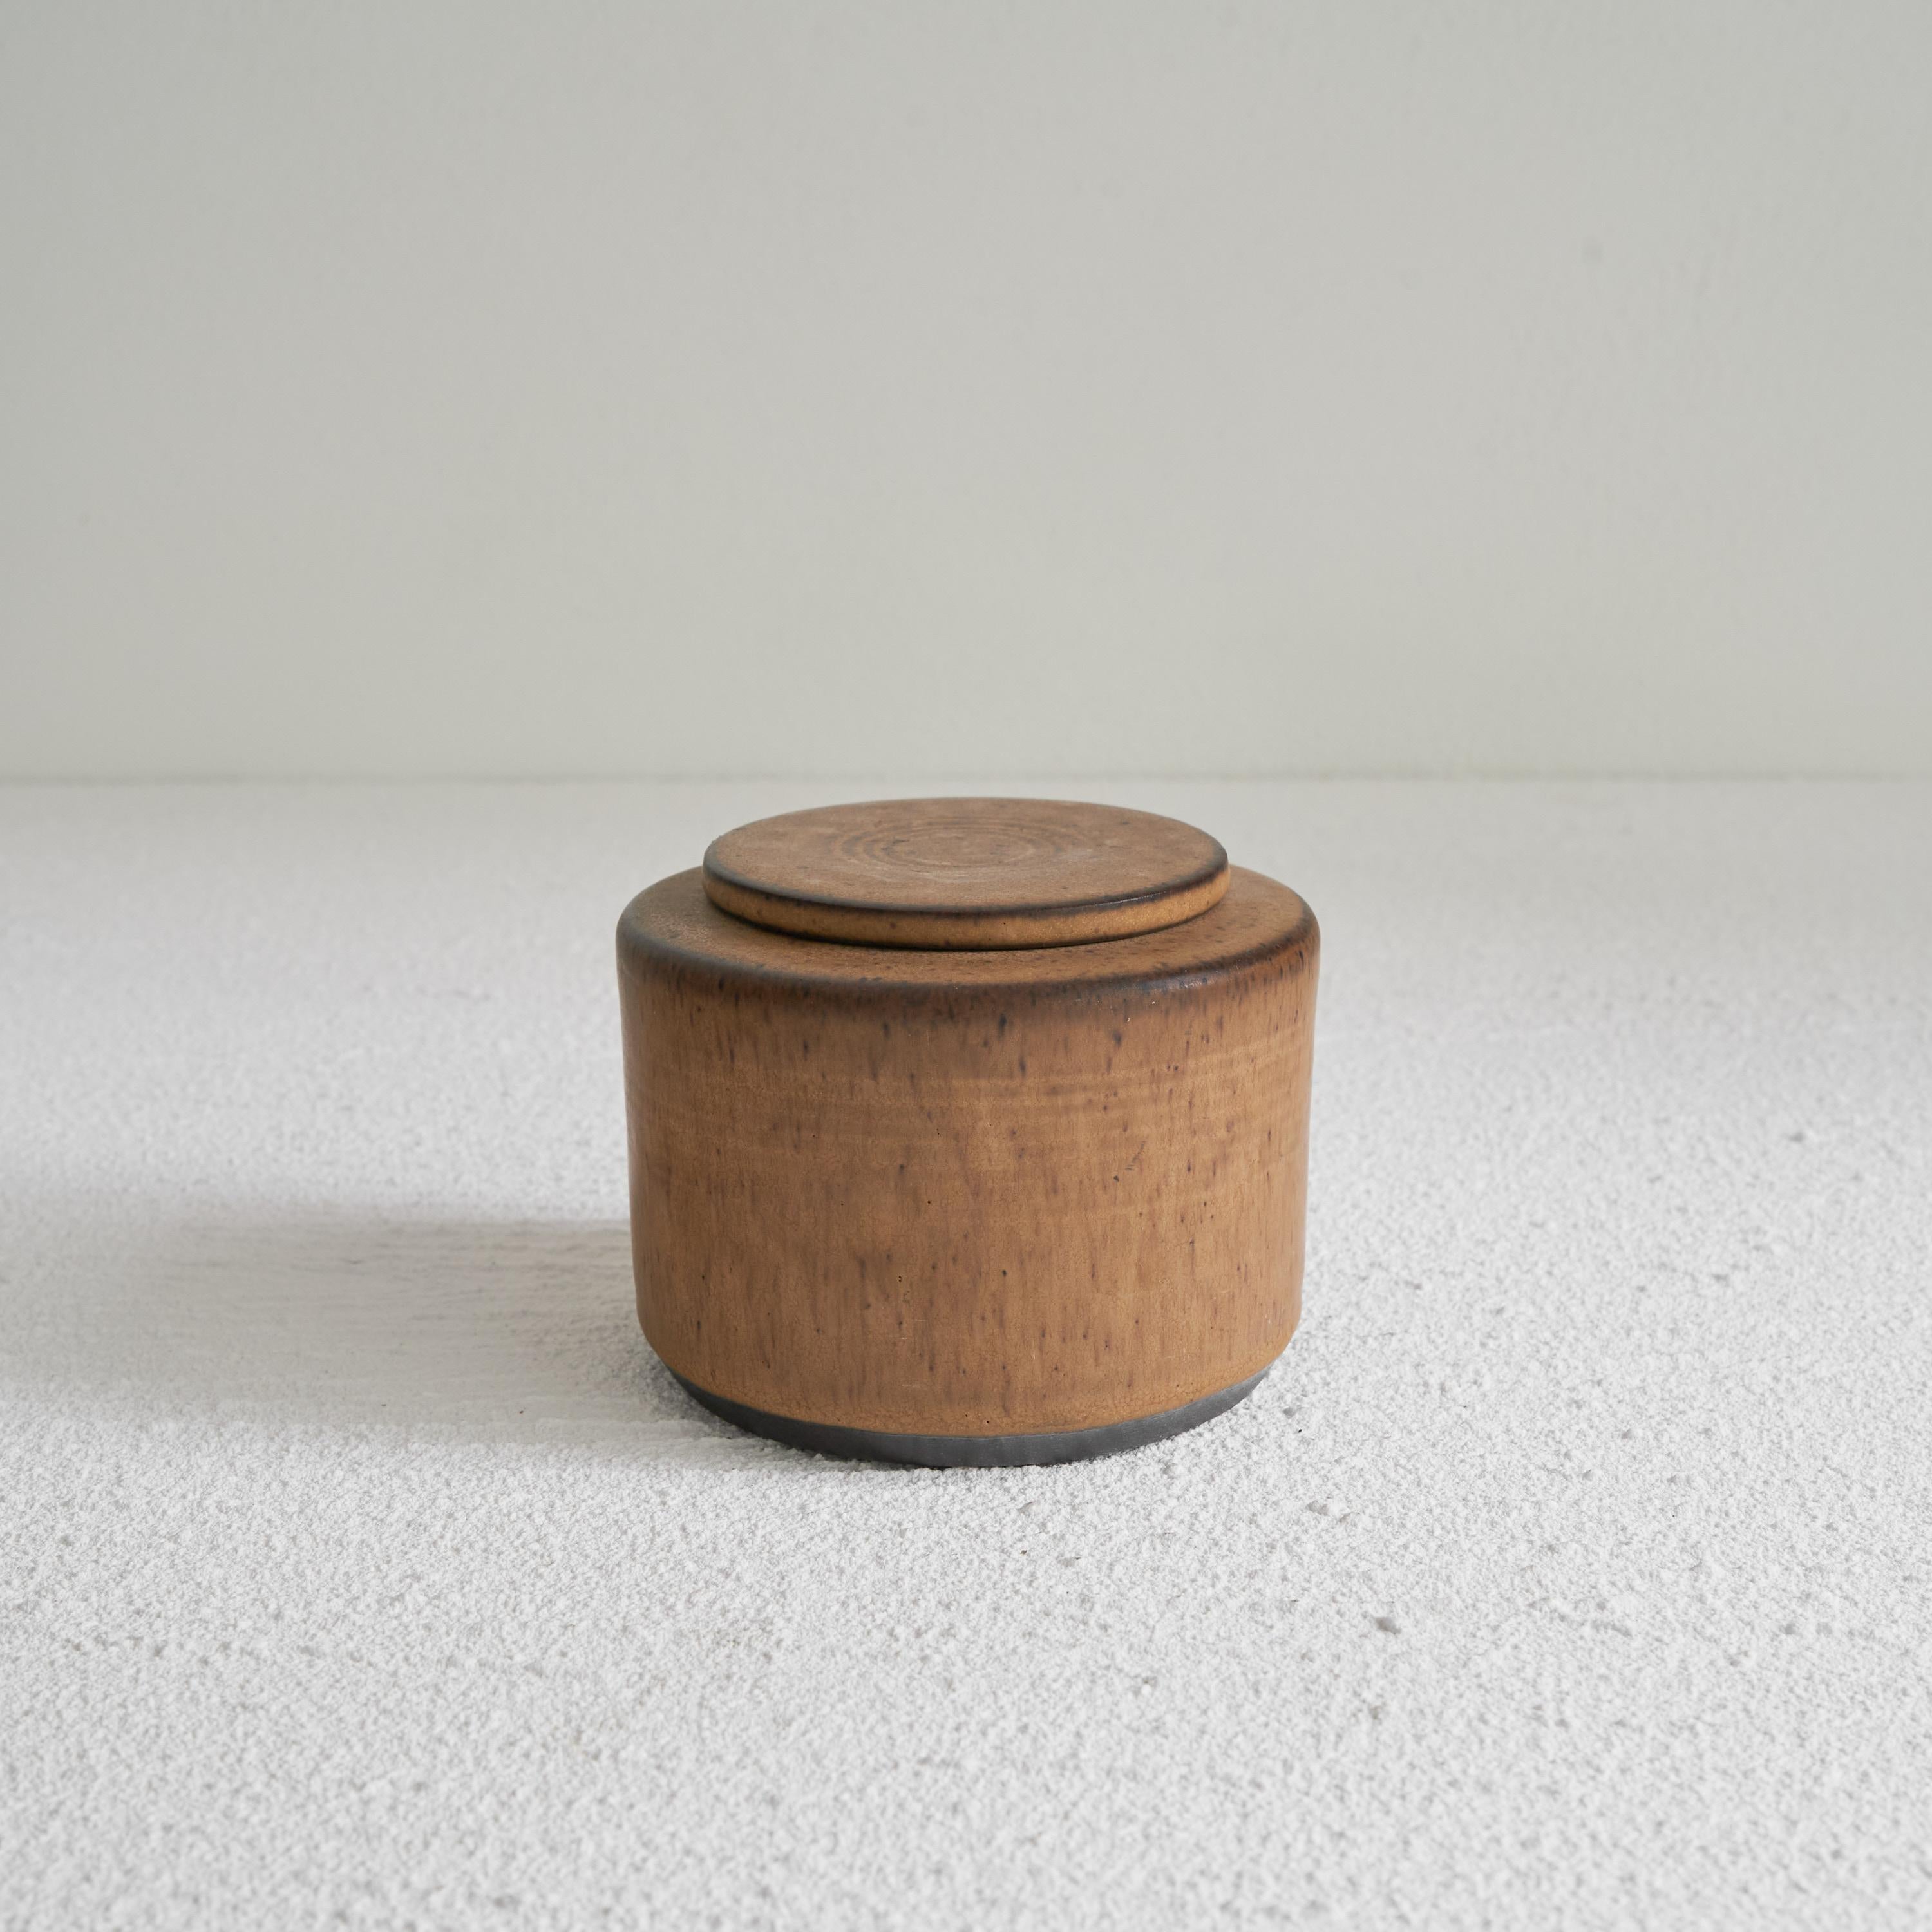 Meindert Zaalberg Studio Pottery 'Stop' lidded box. The Netherlands, 1962.

Beautiful lidded box or pot designed by famous Dutch pottery artist Meindert Zaalberg (1907-1989) for his company Pottery Zaalberg. This is from the series 'Stop' designed